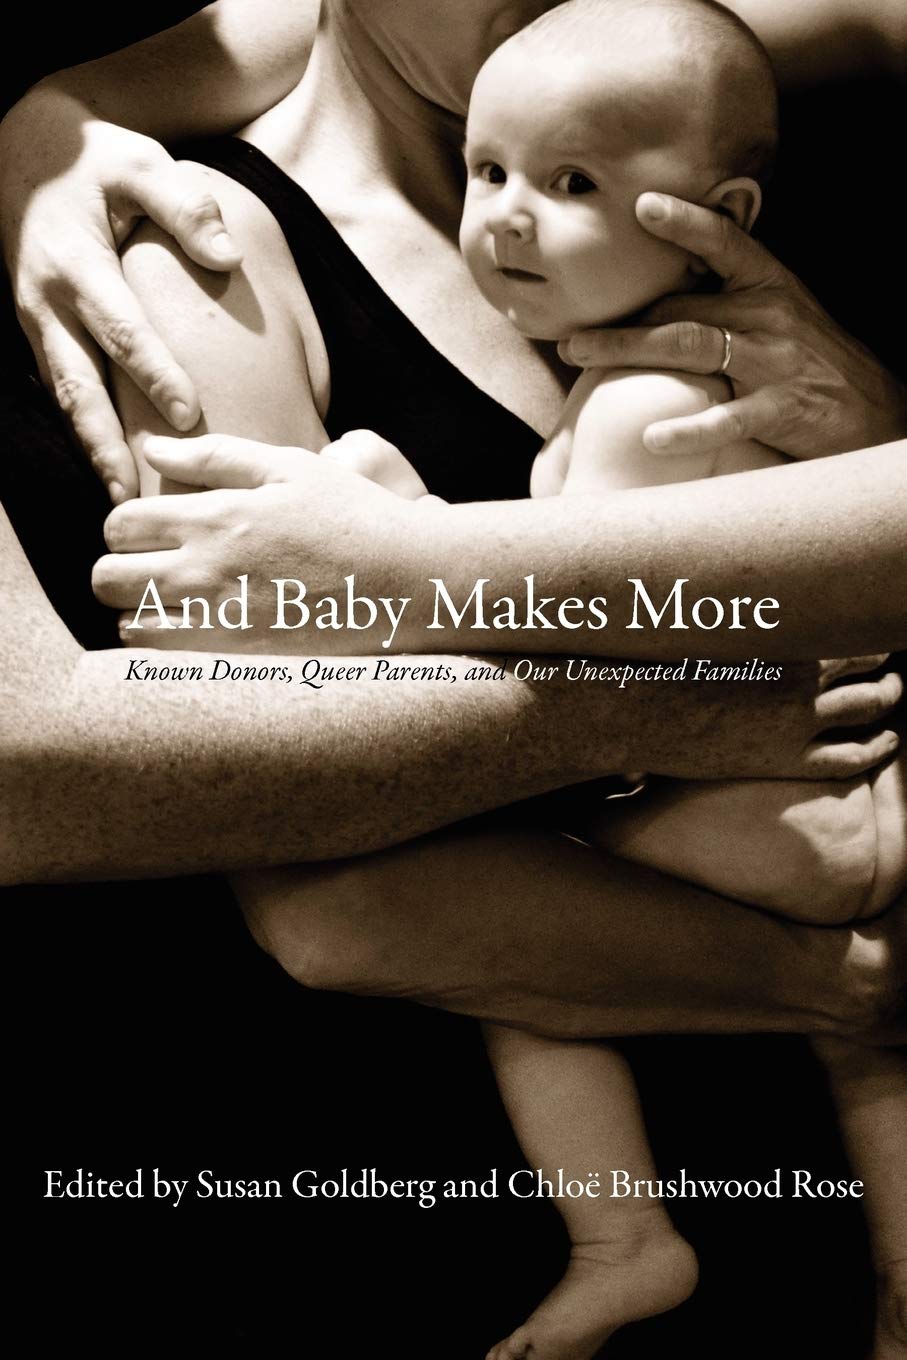 And Baby Makes More: Known Donors, Queer Parents, and Our Unexpected Families – Susan Goldberg & Chloe Brushwood